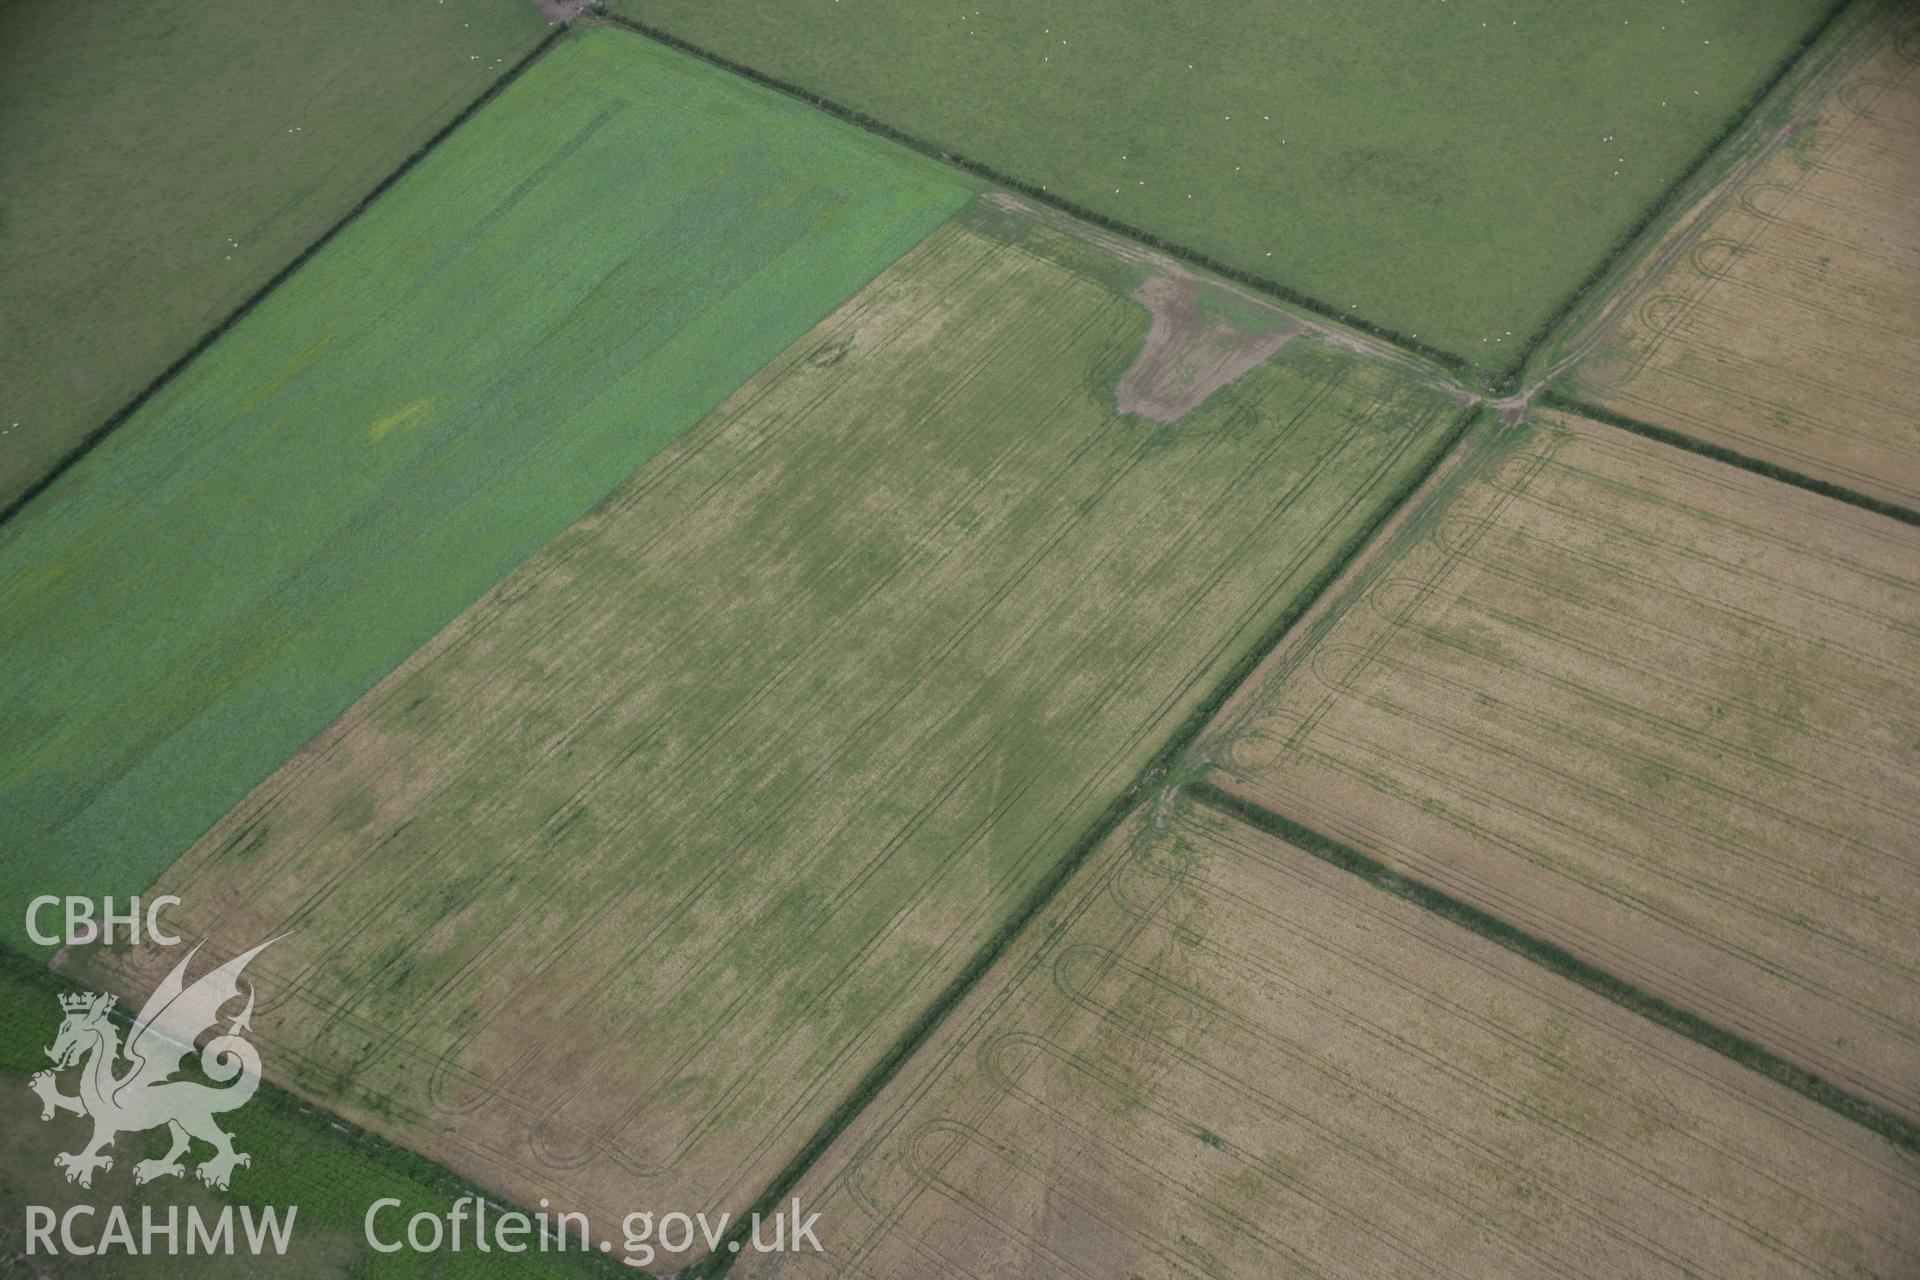 RCAHMW digital colour oblique photograph of a poorly defined cropmark south-west of Rhuddgaer viewed from the south. Taken on 02/08/2005 by T.G. Driver.